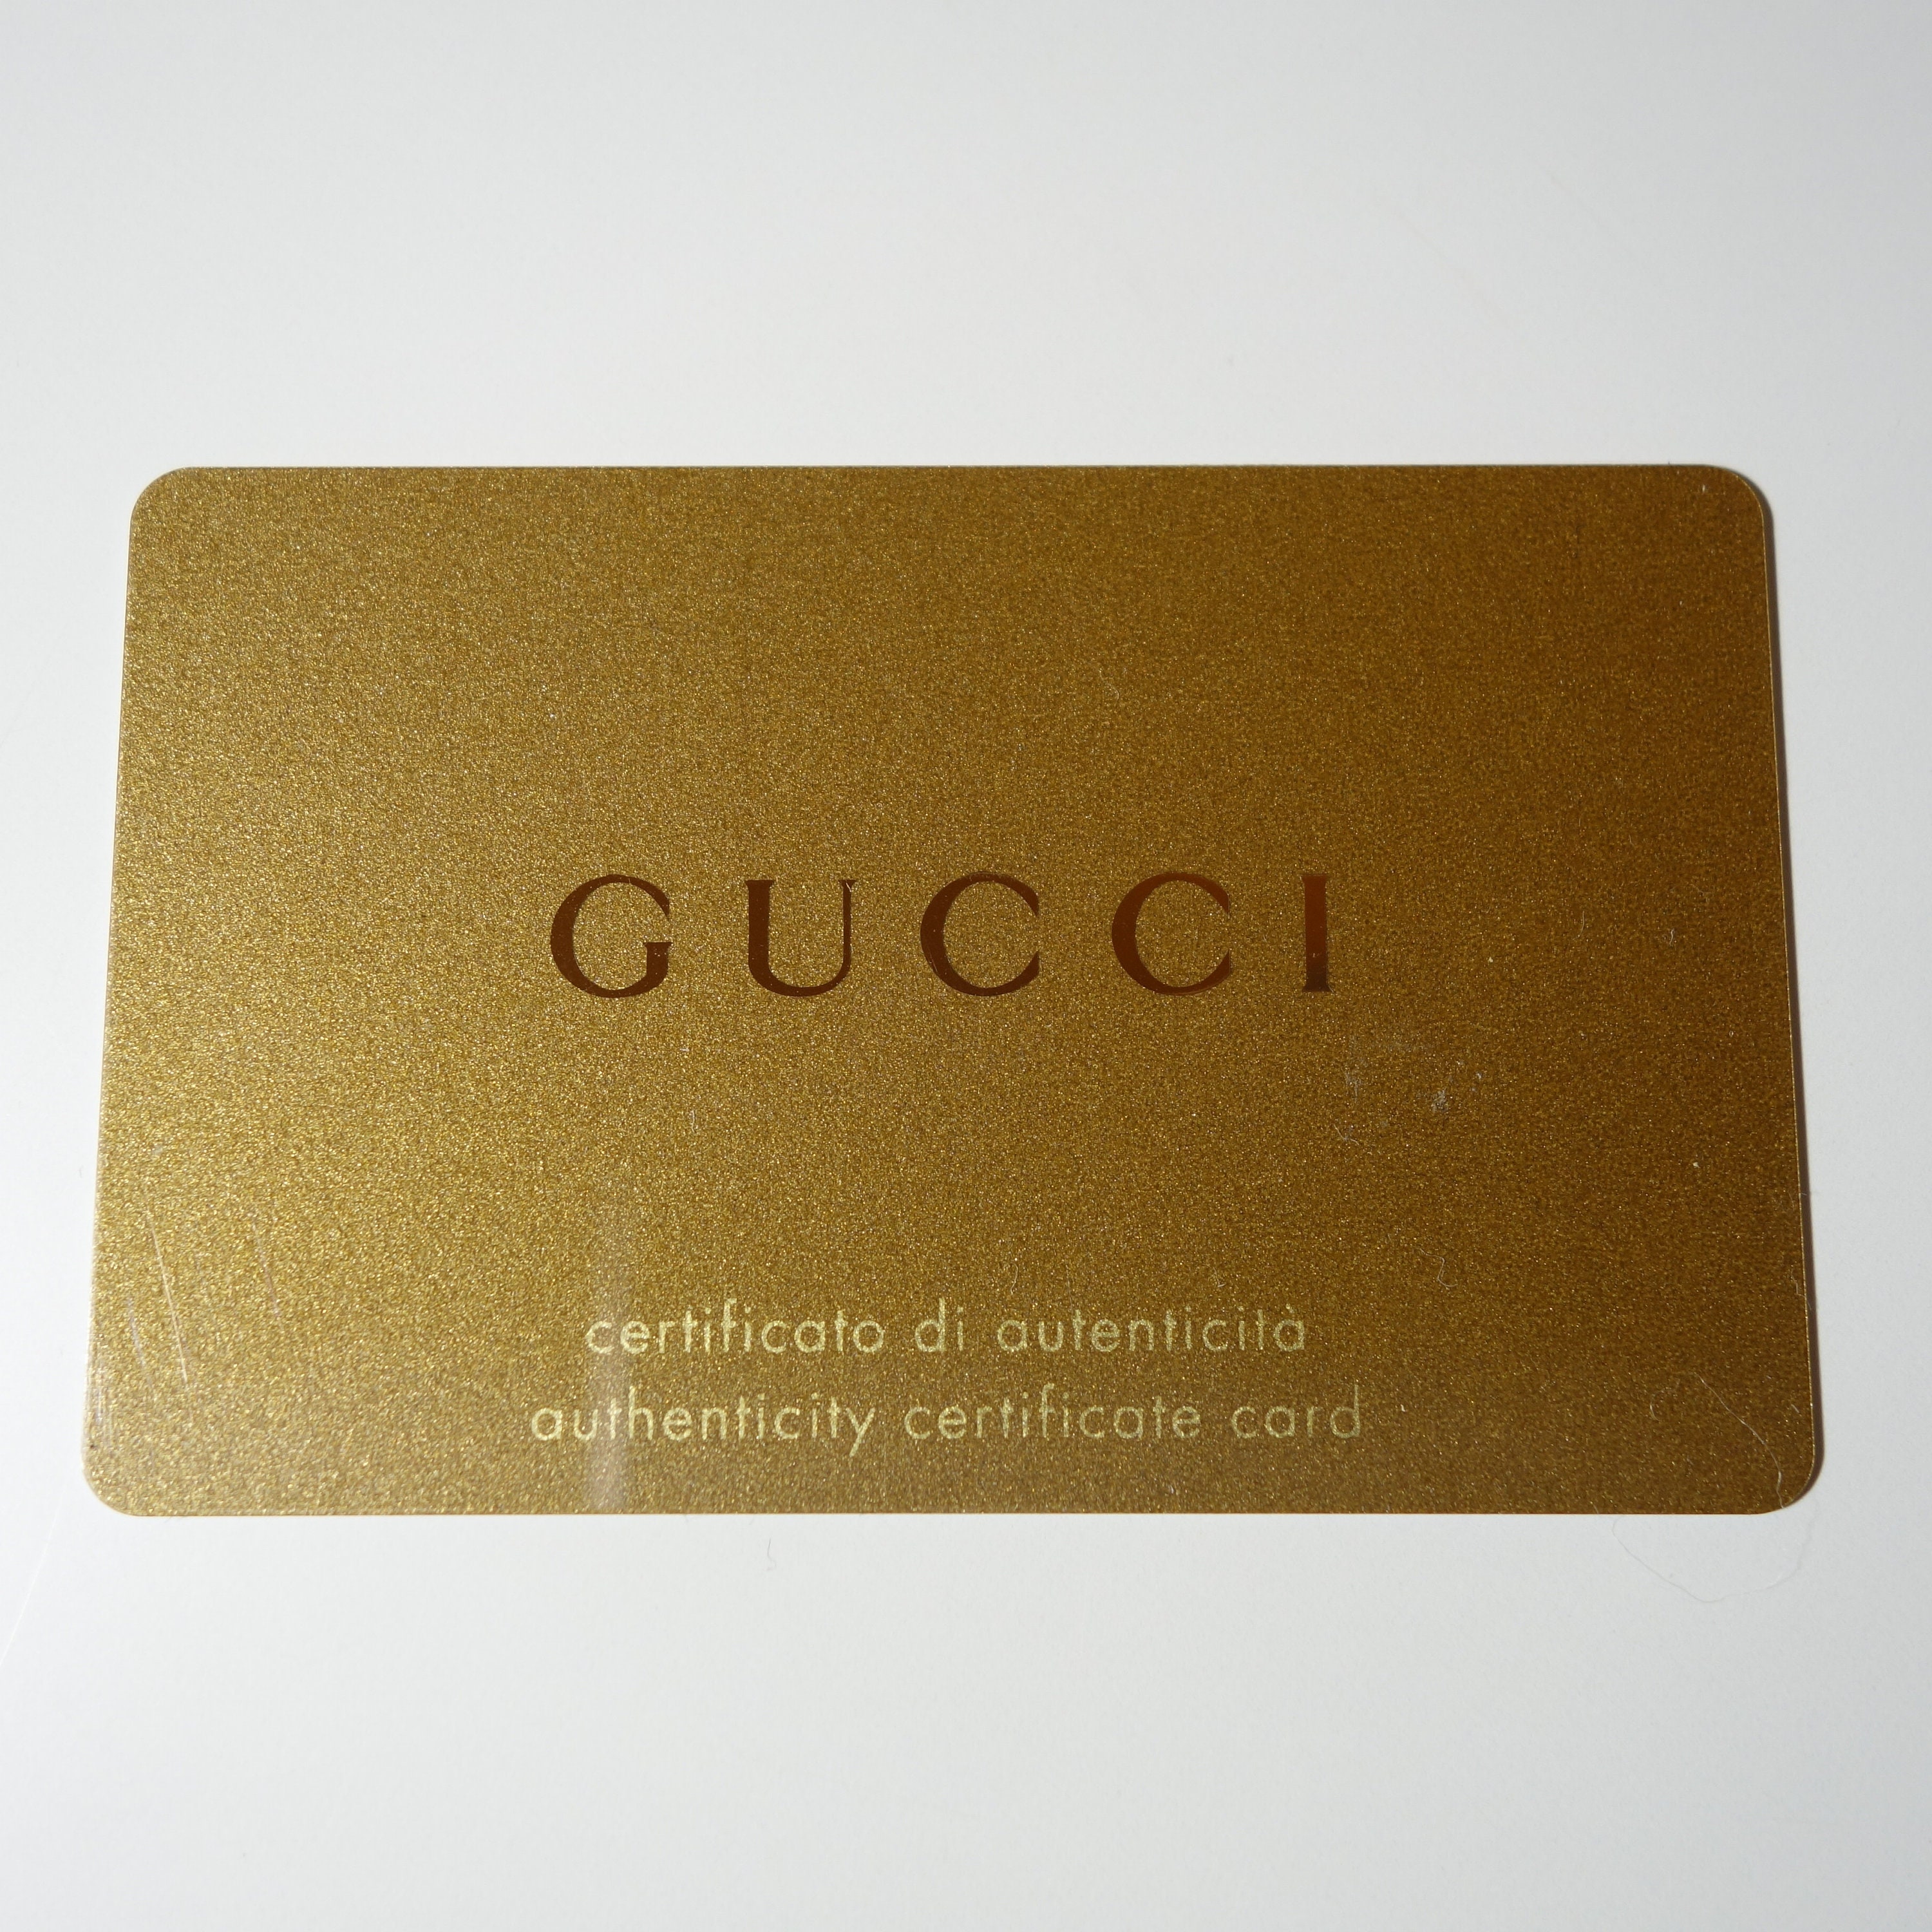 Gucci Authenticity Certificate Card & Envelope Only